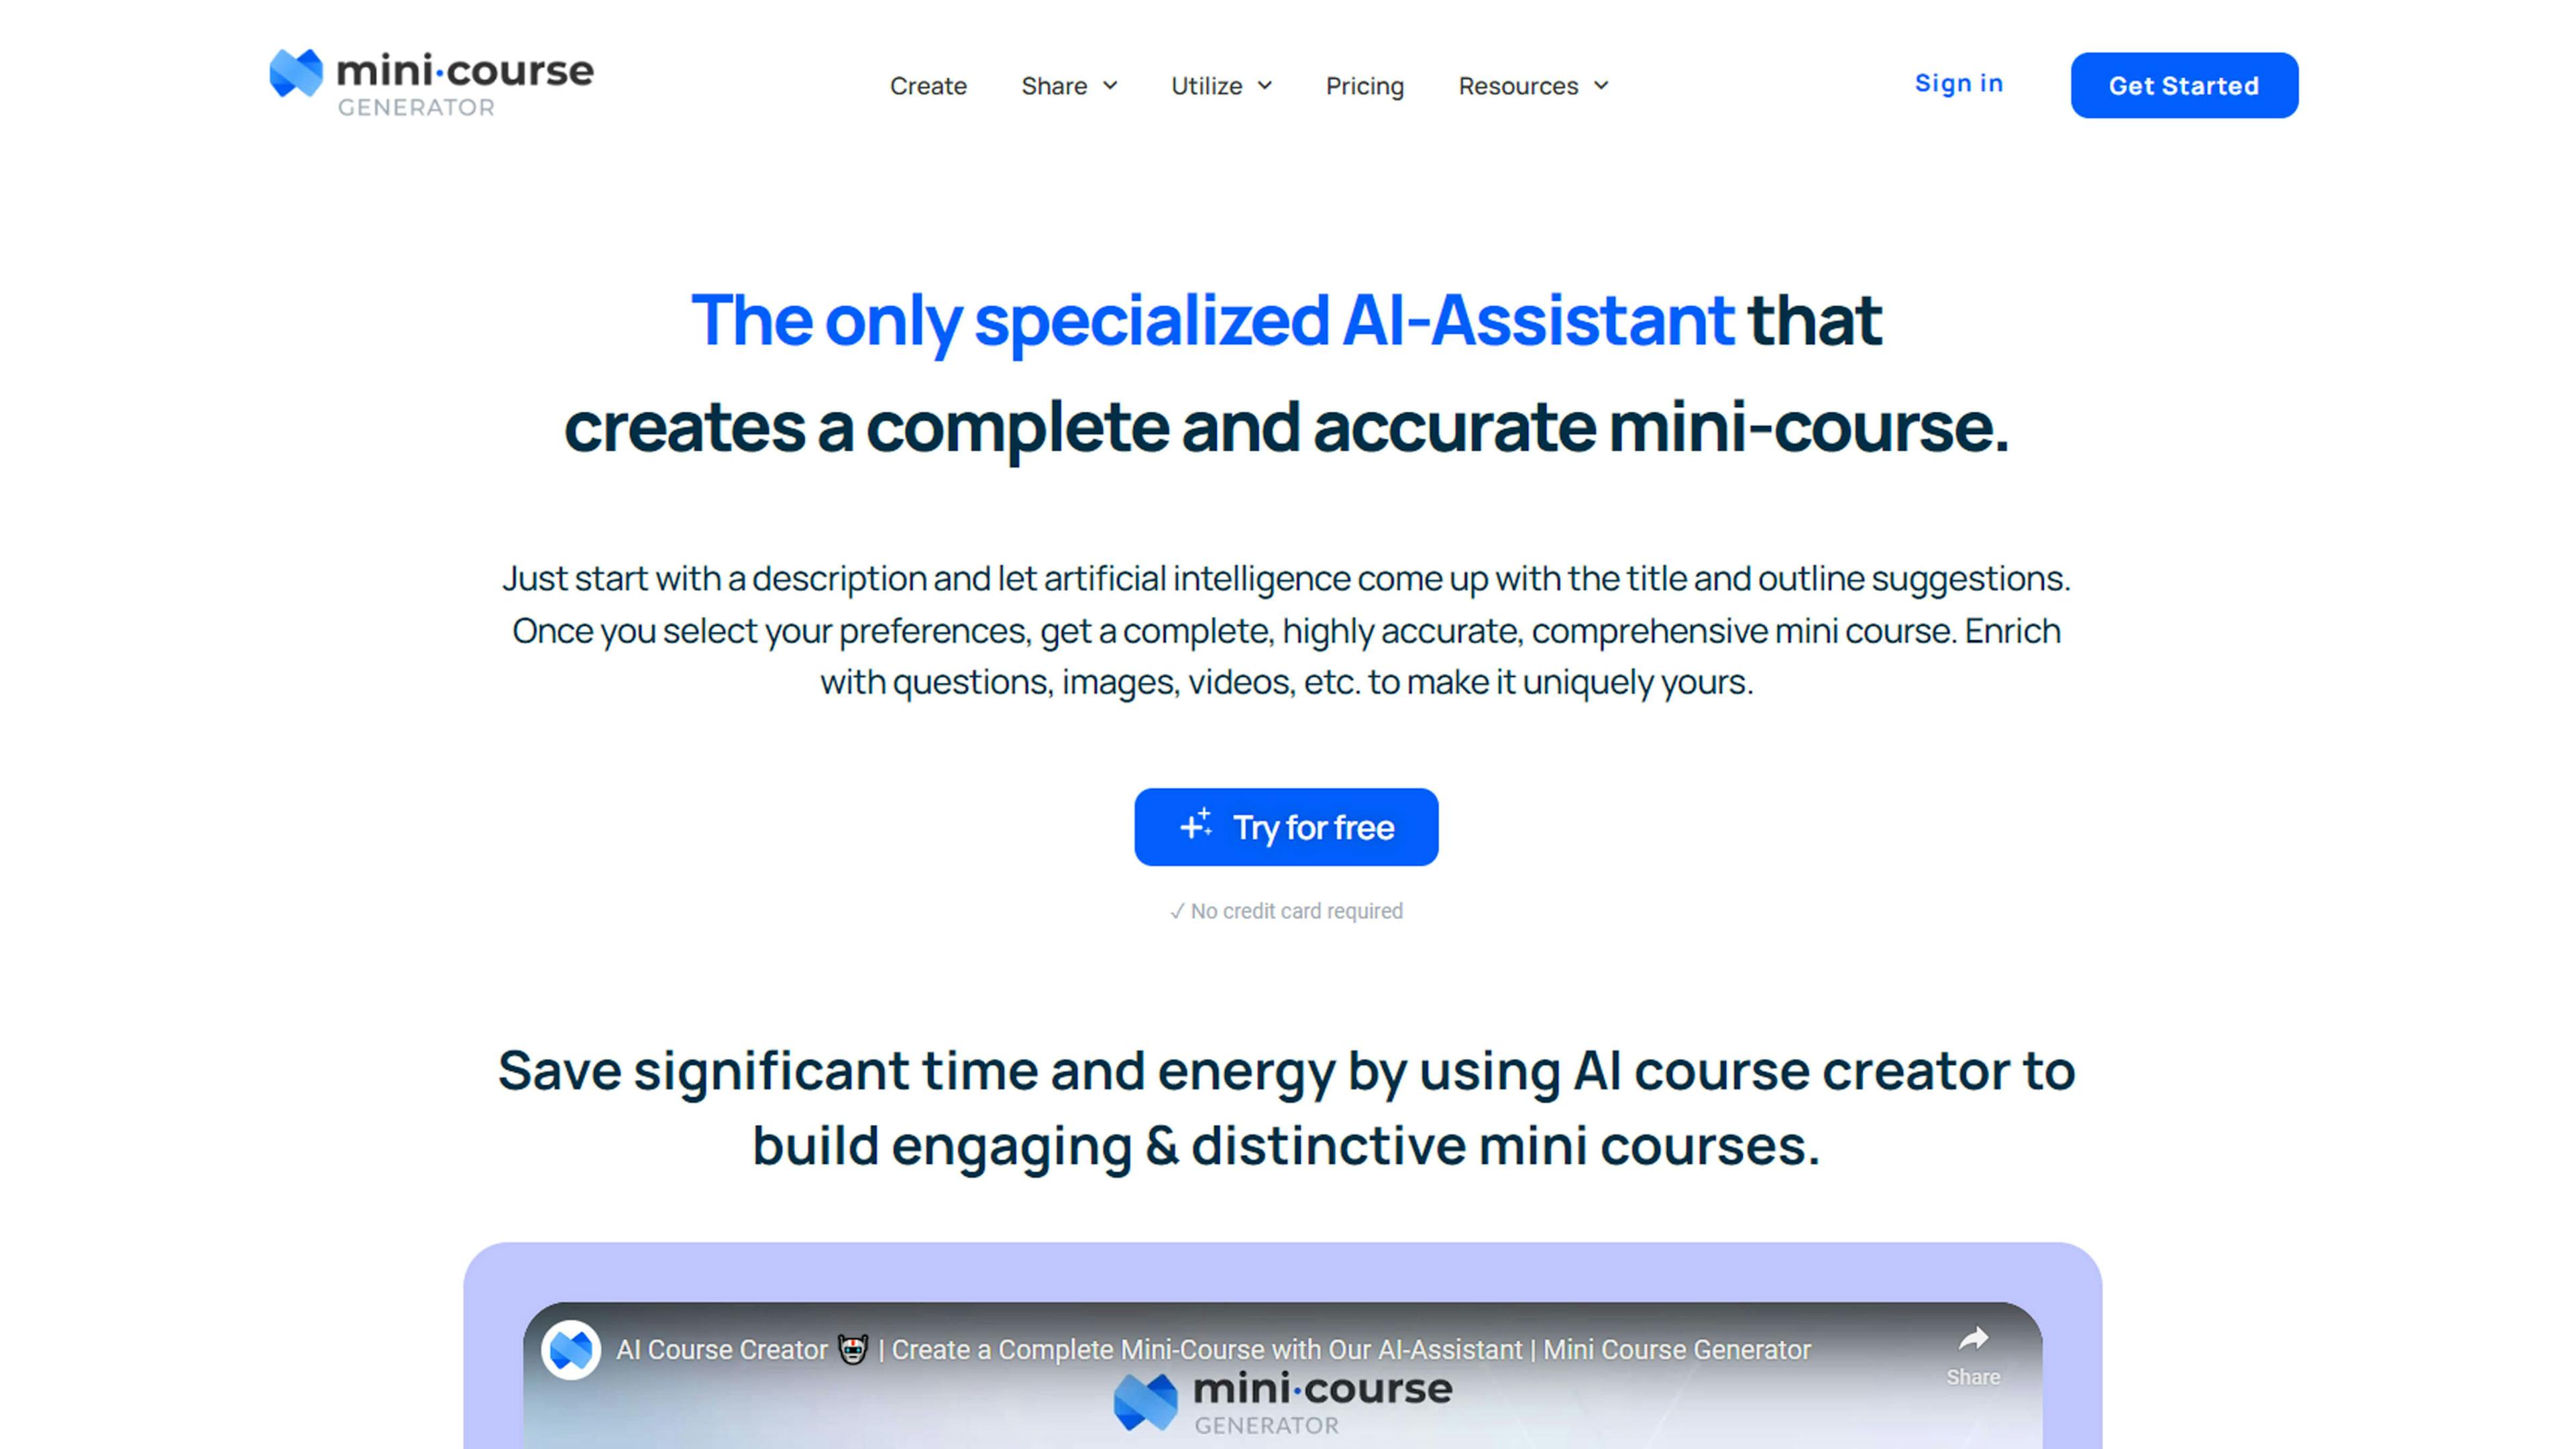 Turn Ideas into Courses Effortlessly with AI